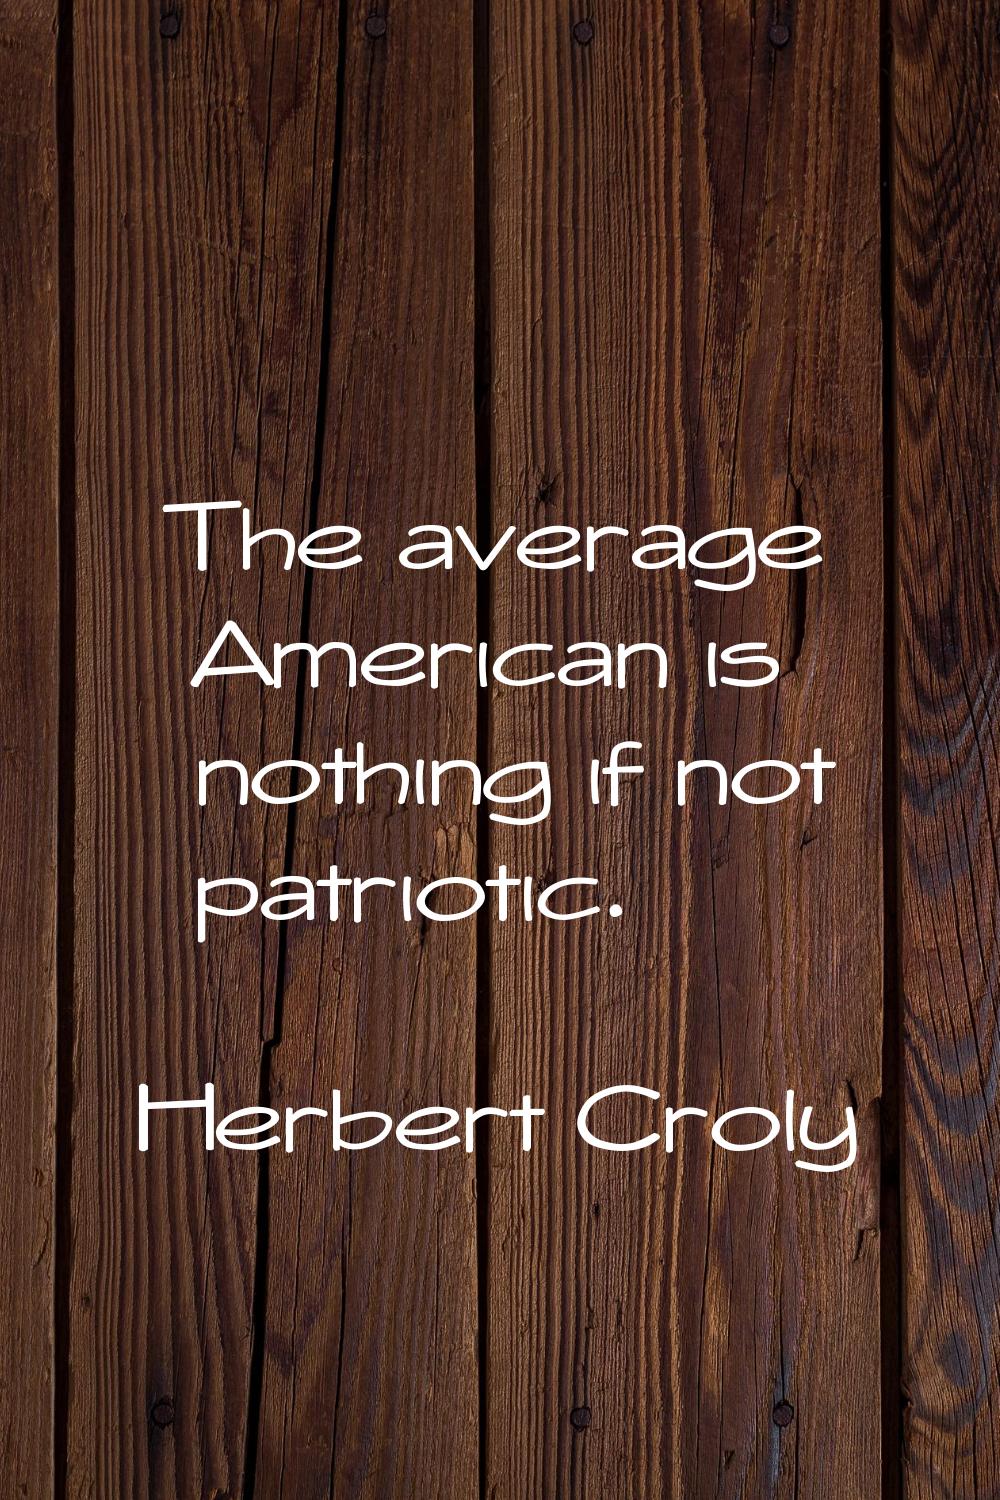 The average American is nothing if not patriotic.